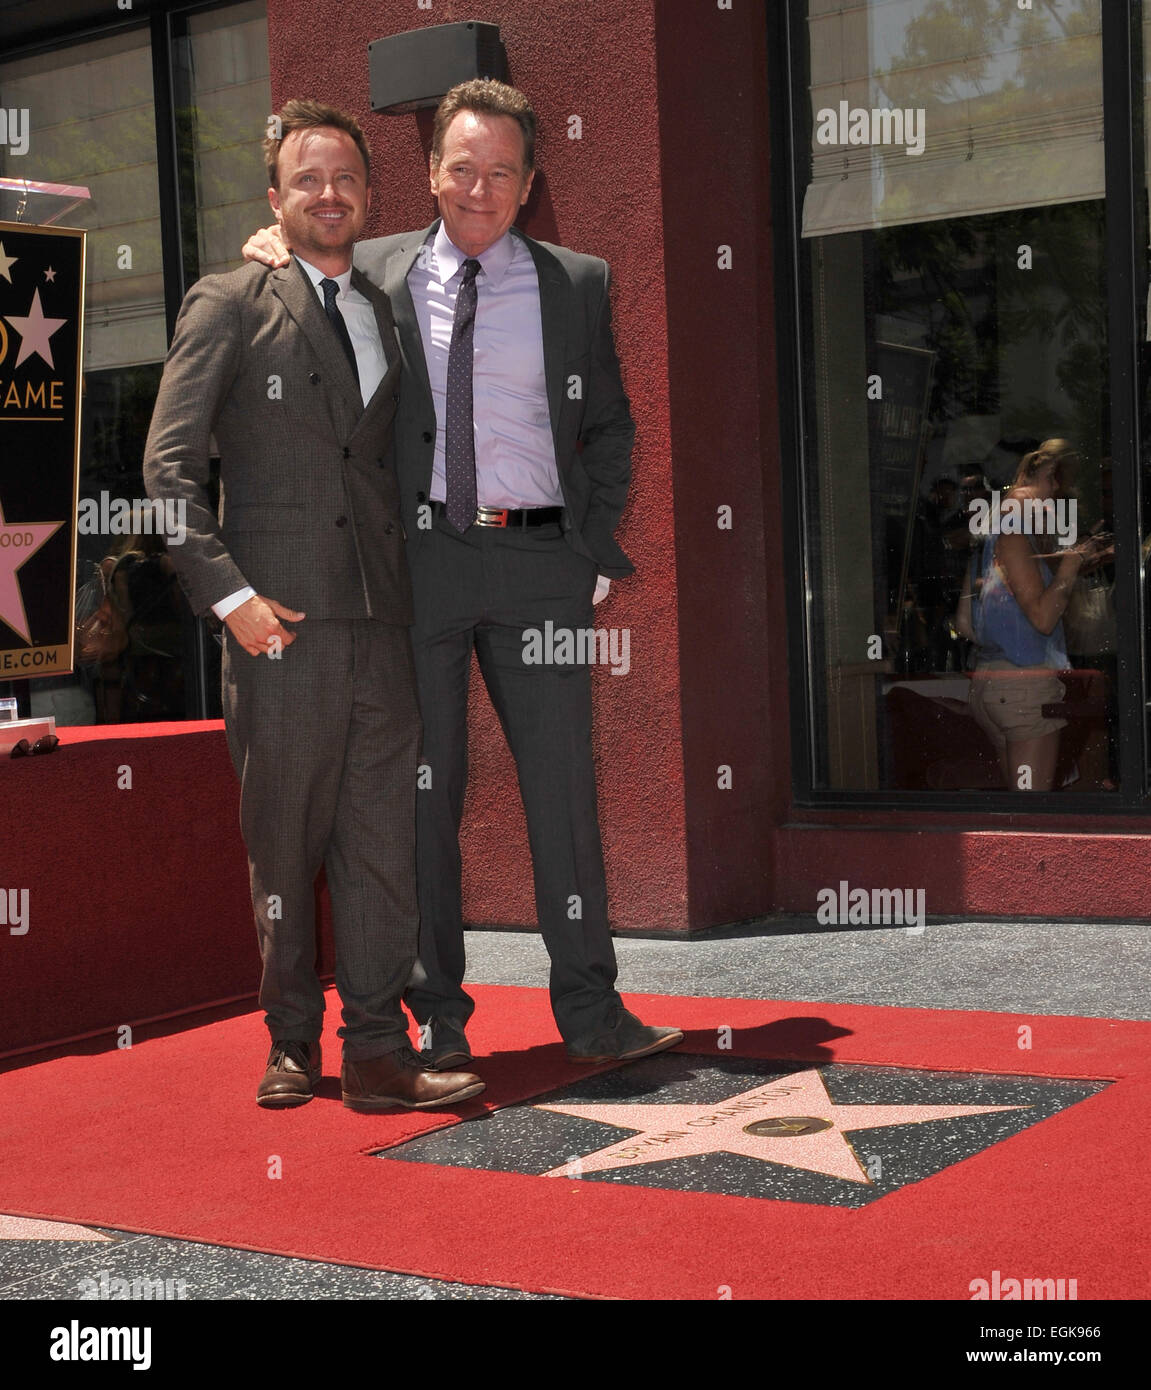 LOS ANGELES, CA - JULY 16, 2013: Bryan Cranston & his Breaking Bad co-star Aaron Paul presented with the 2,502nd star on the Hollywood Walk of Fame. Stock Photo